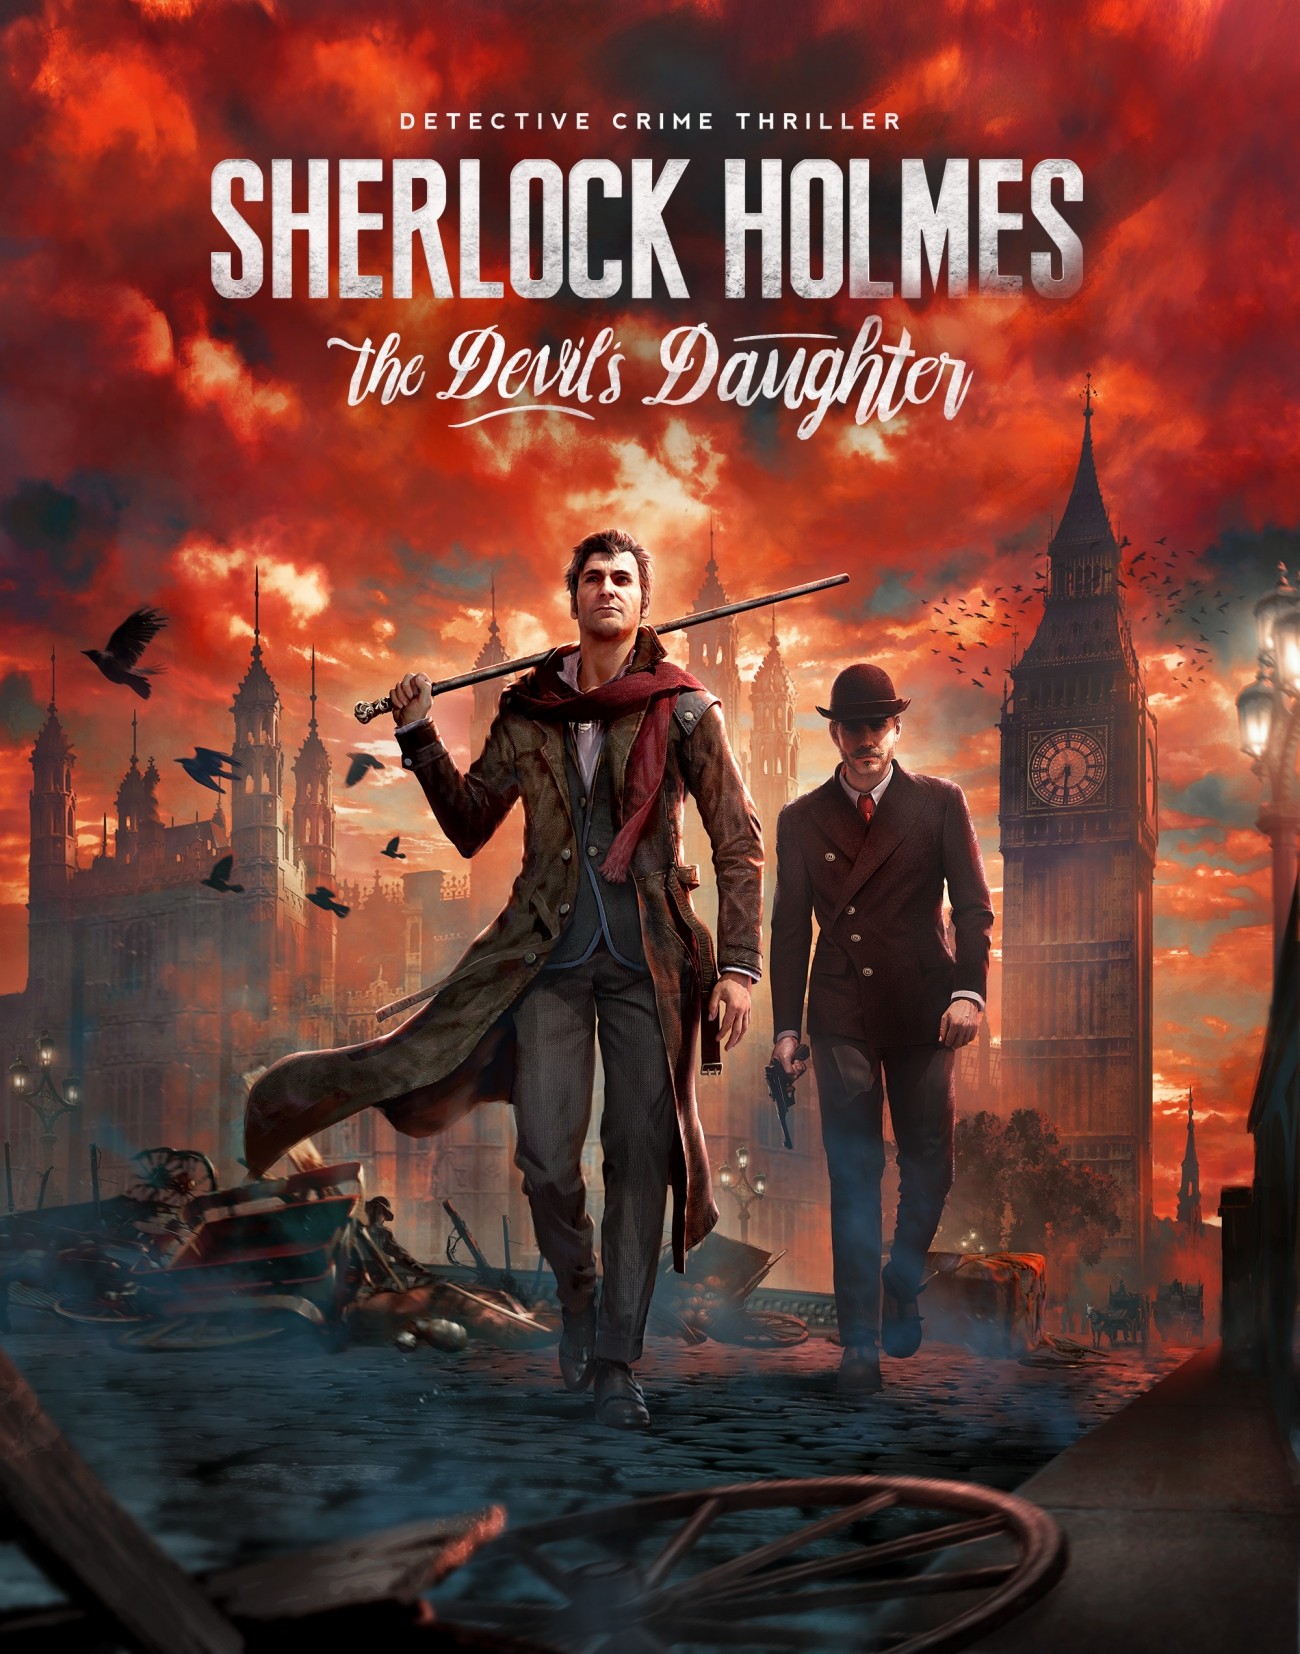 New Sherlock Holmes The Devil's Daughter game out now